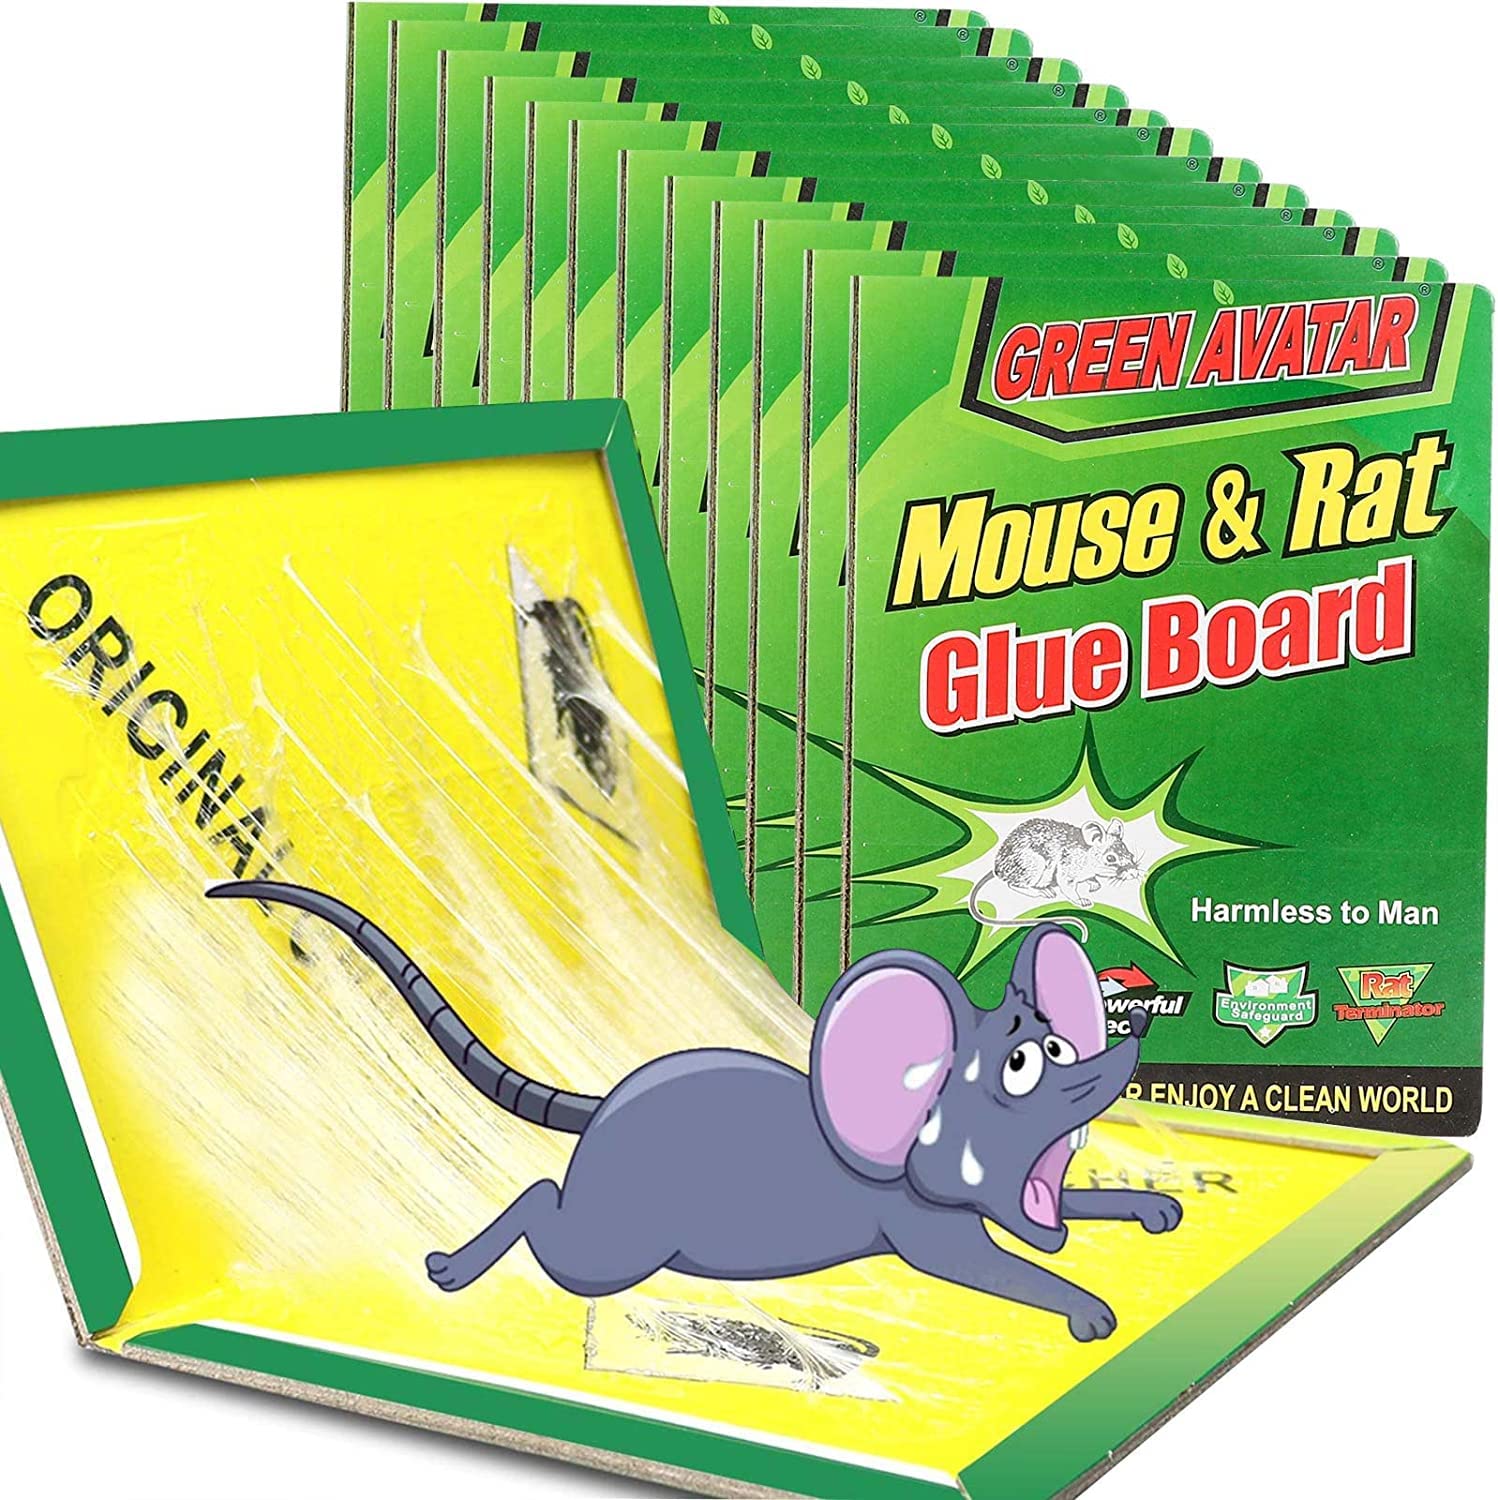 8Pc Mouse Traps Sticky Glue Rat Mice Disposable Glue Boards Baited